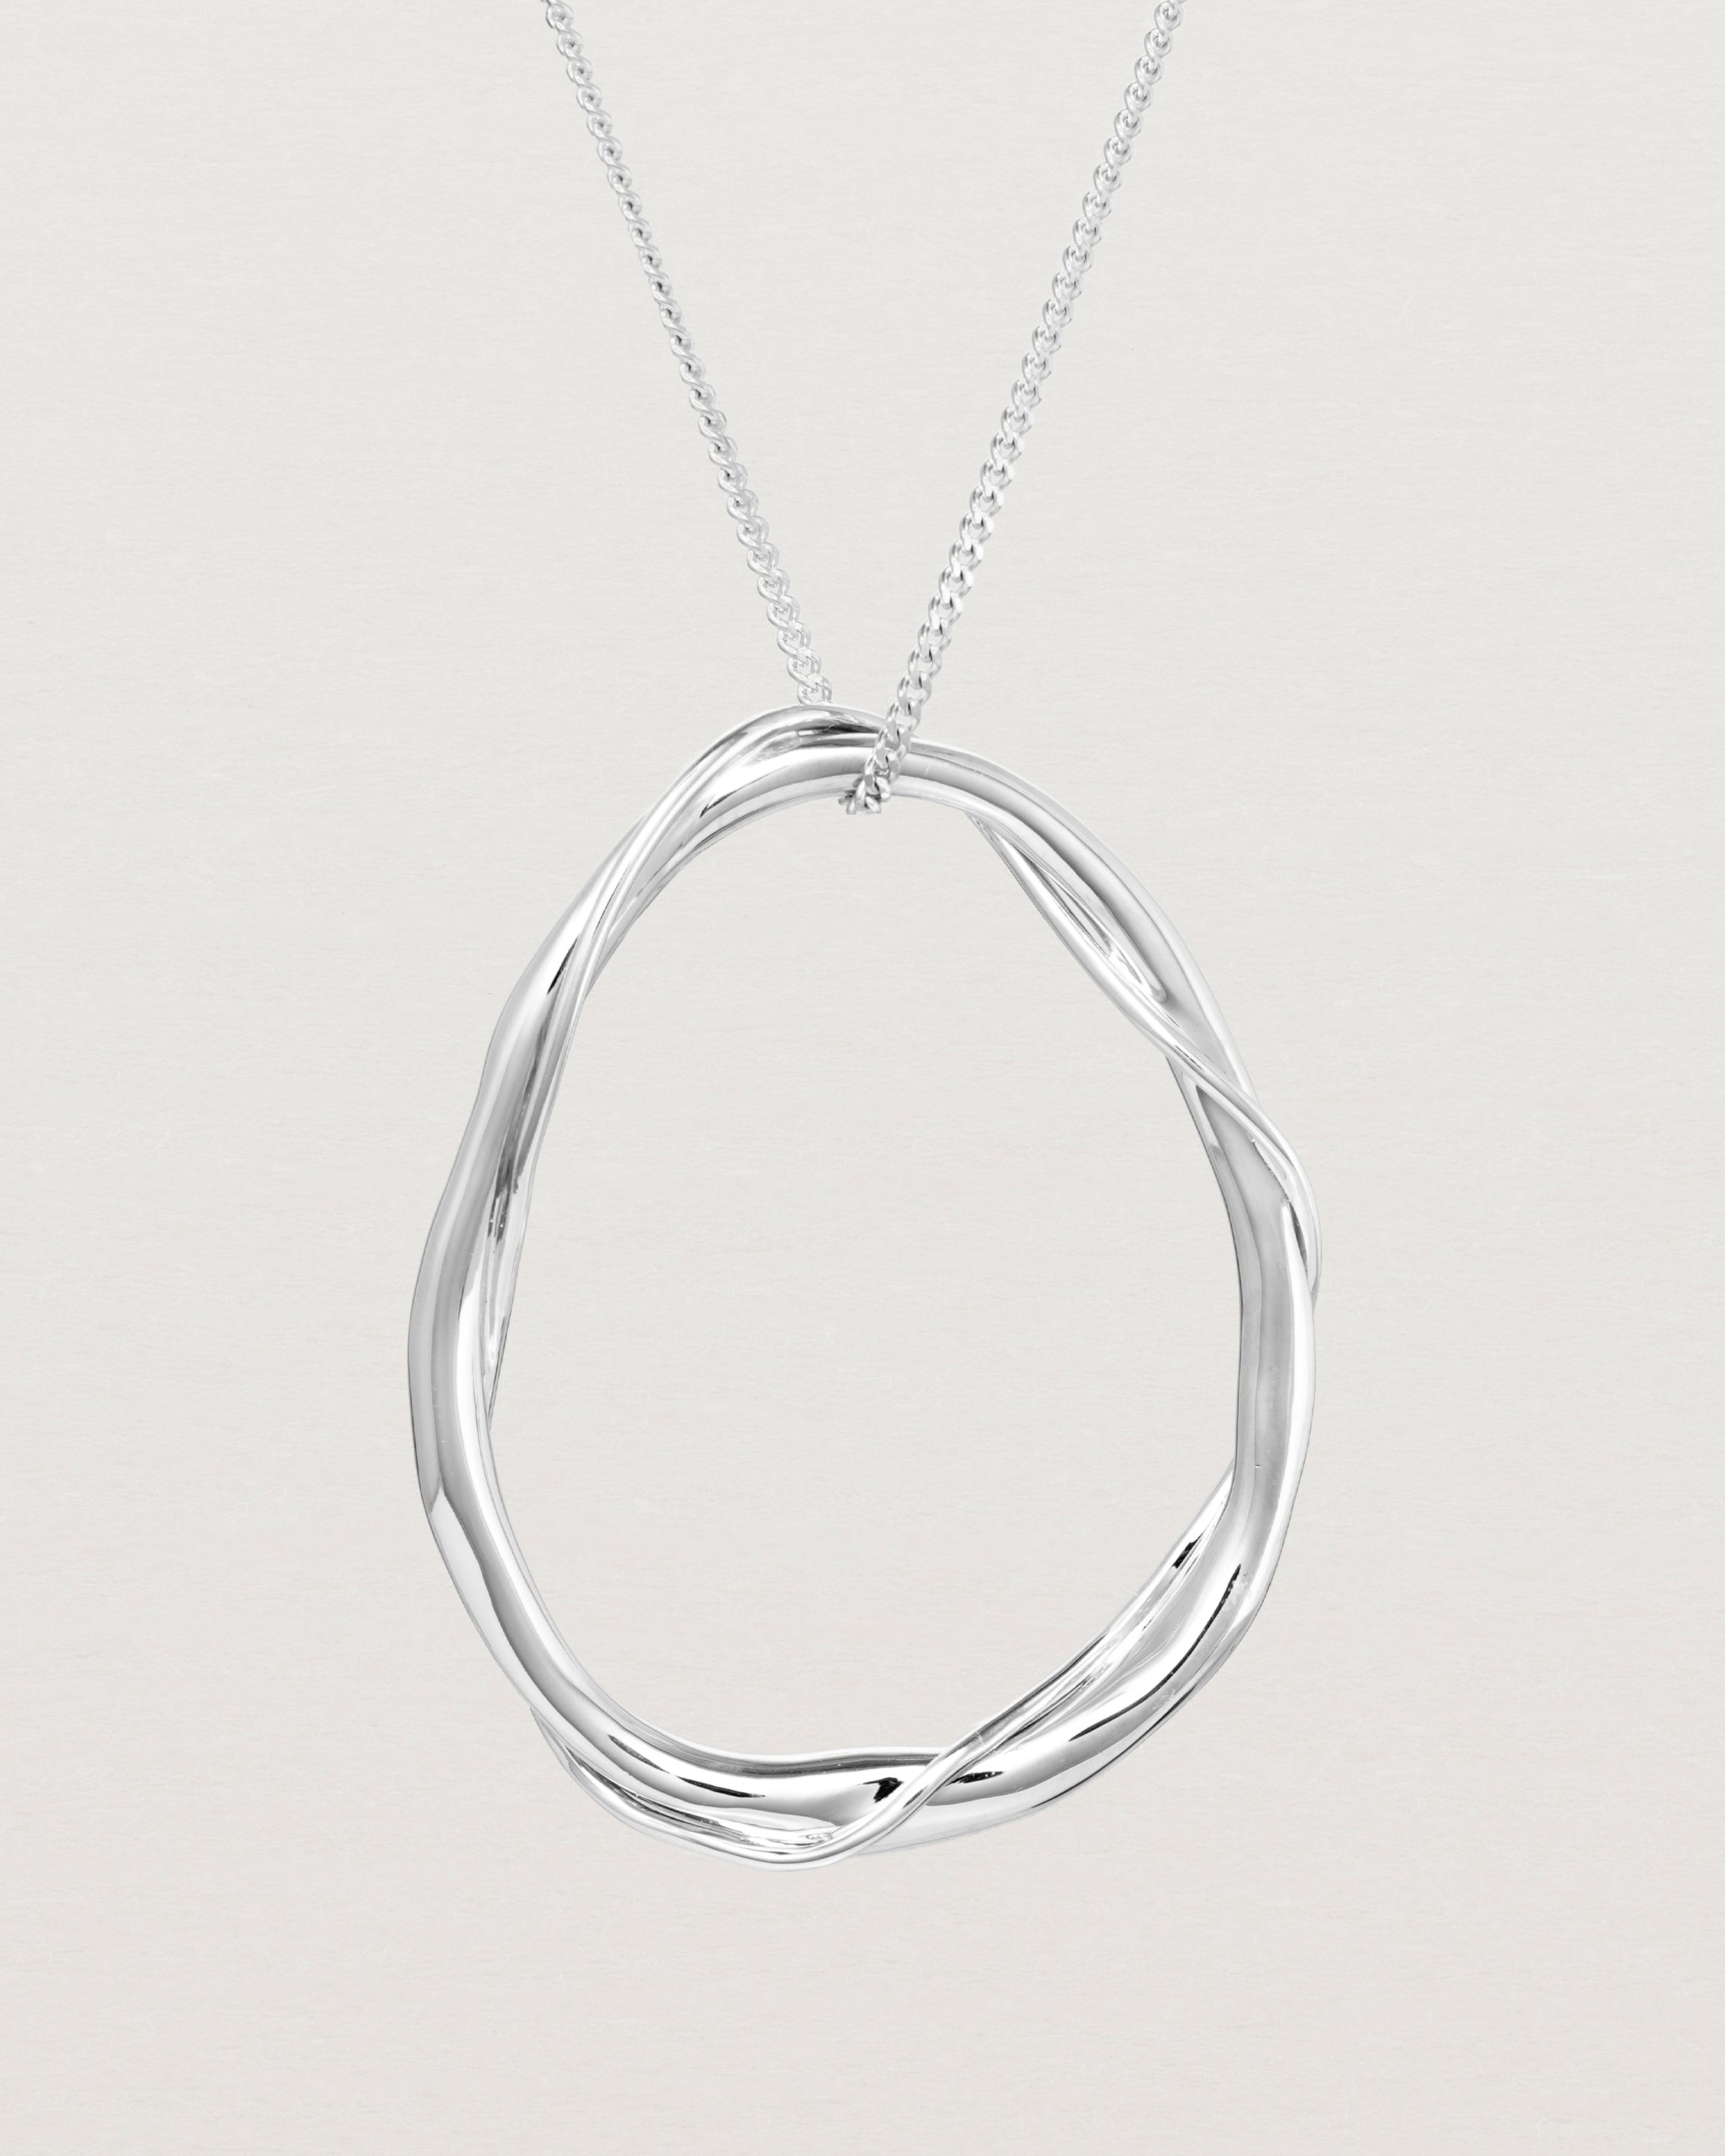 Close up view of the Dalí Necklace in sterling silver.